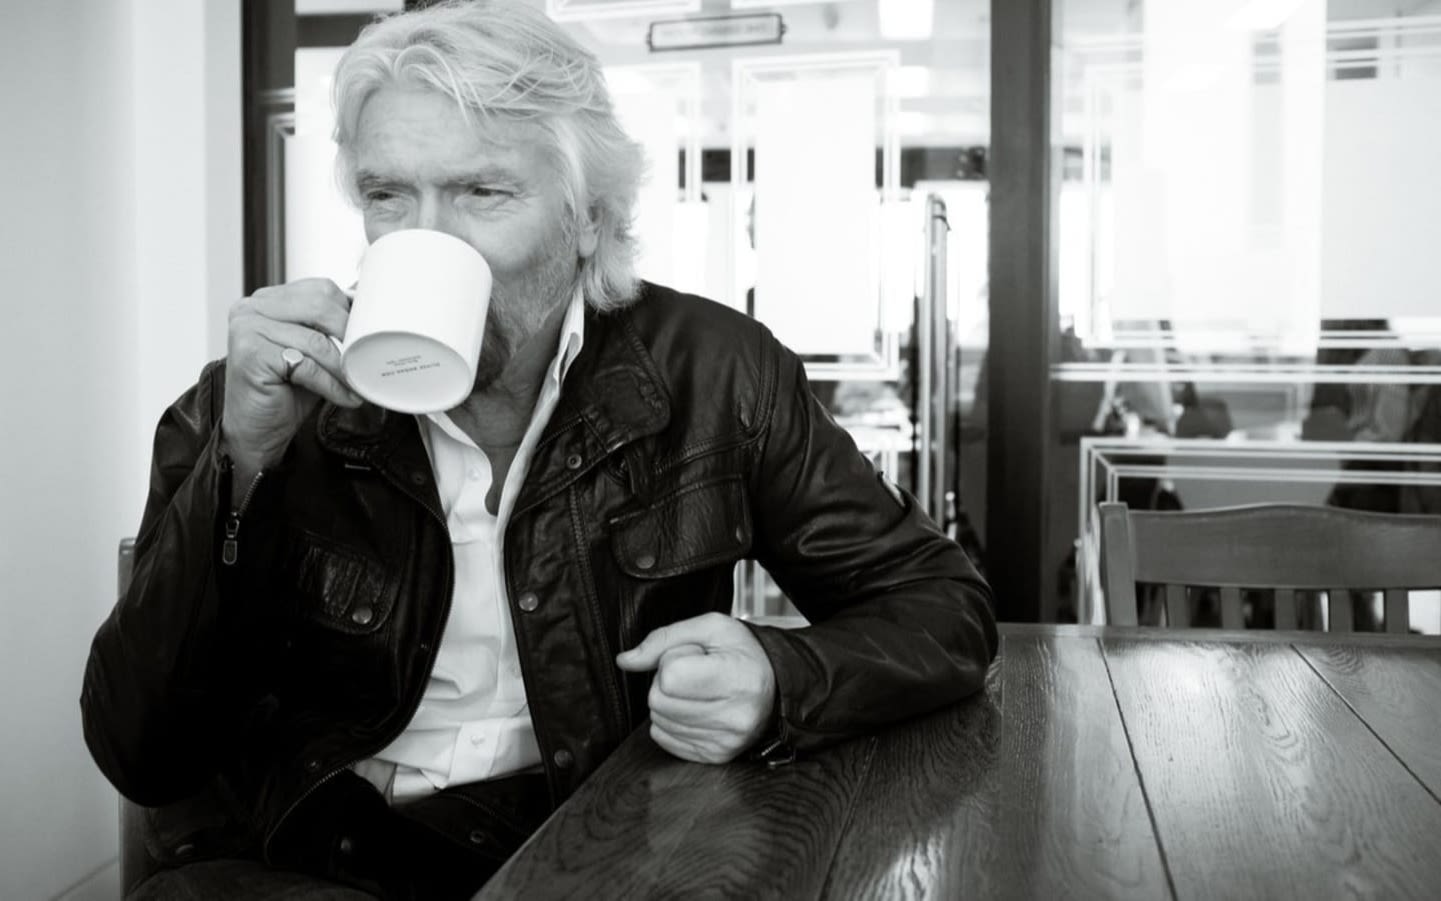 Black and white image of Richard Branson sitting at a table drinking from a mug